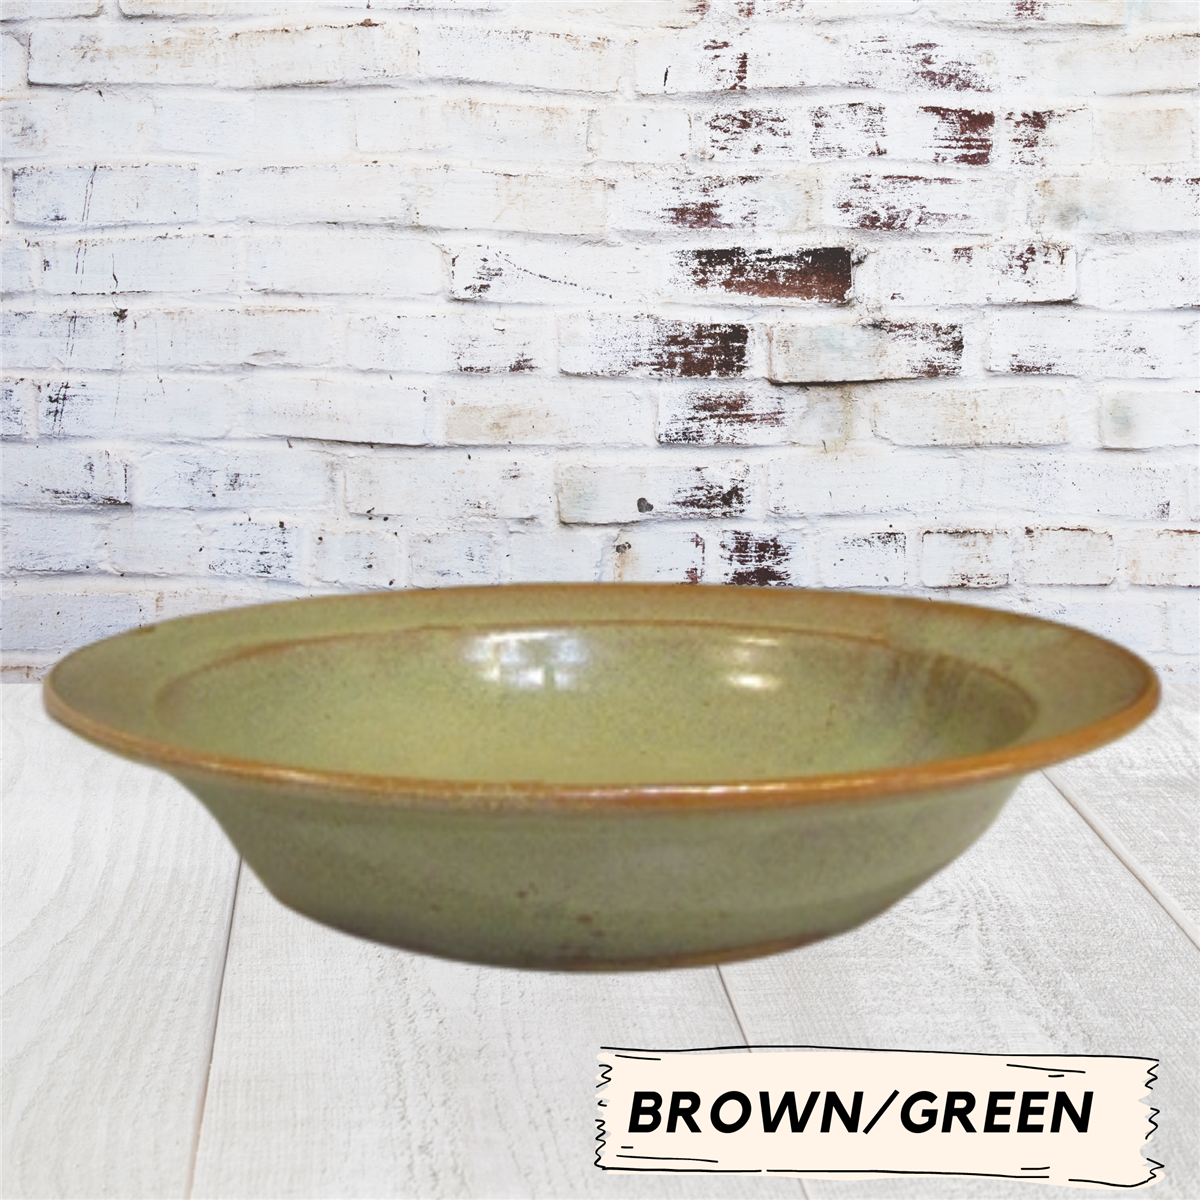 Pasta soup or salad bowl room for crackers along wide edge. Handmade pottery. Ceramic shallow dish